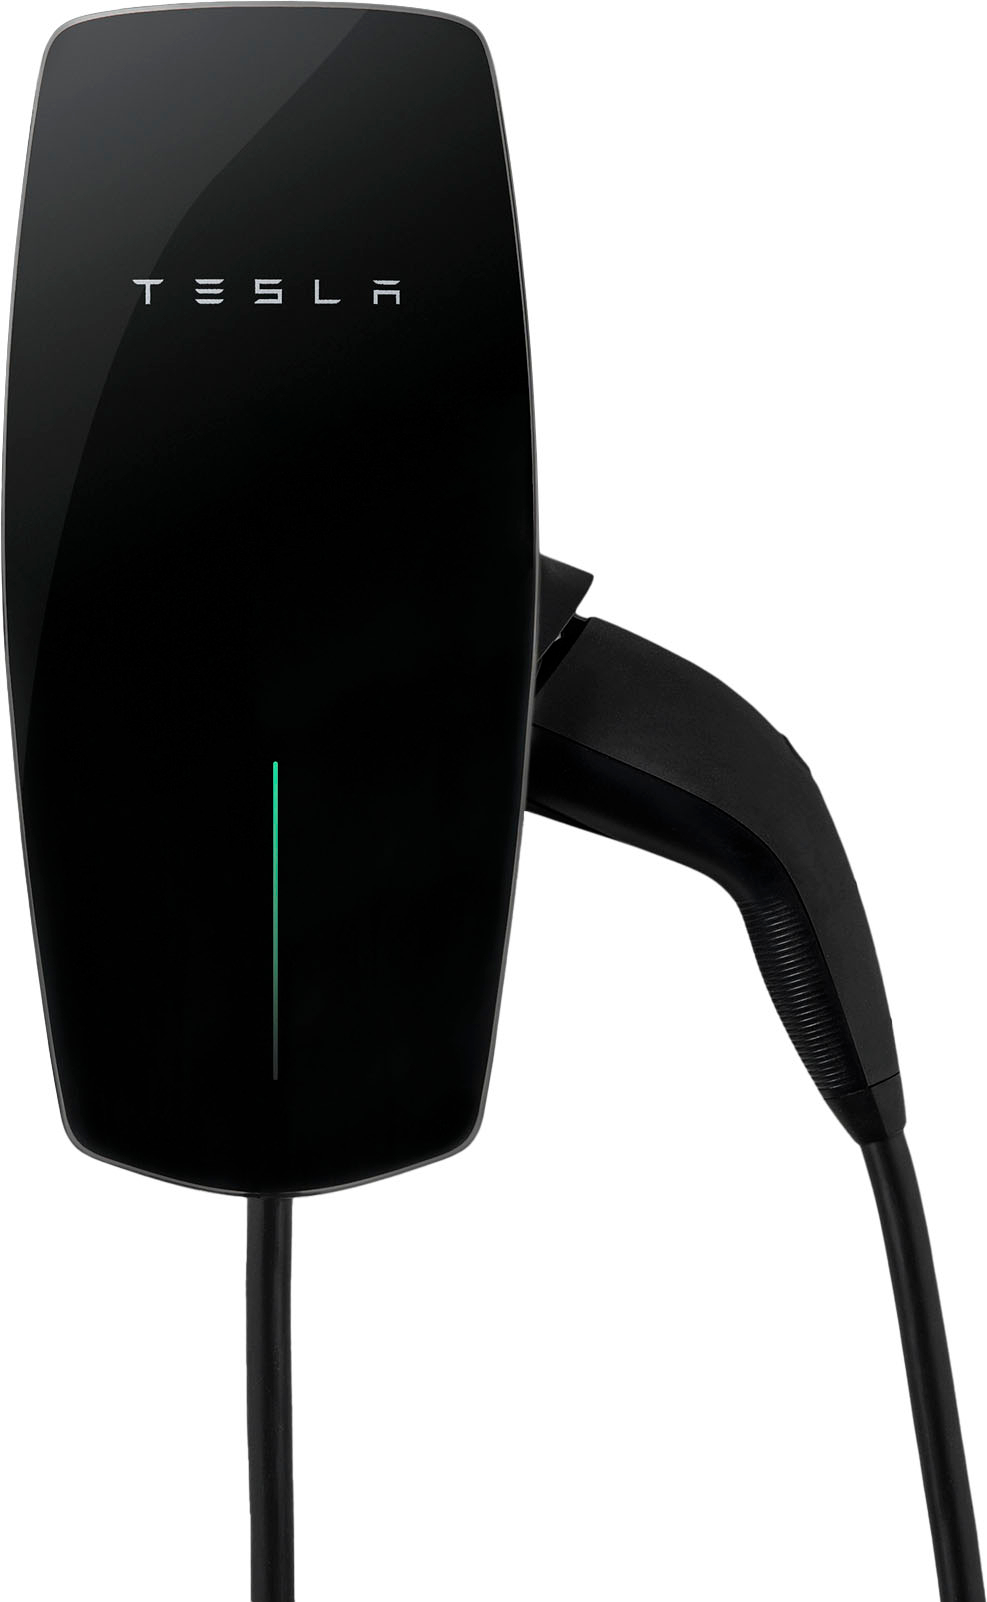 Tesla High Power Wall Connector Charger With 24' Cable 2nd Gen. Model S X  for sale online